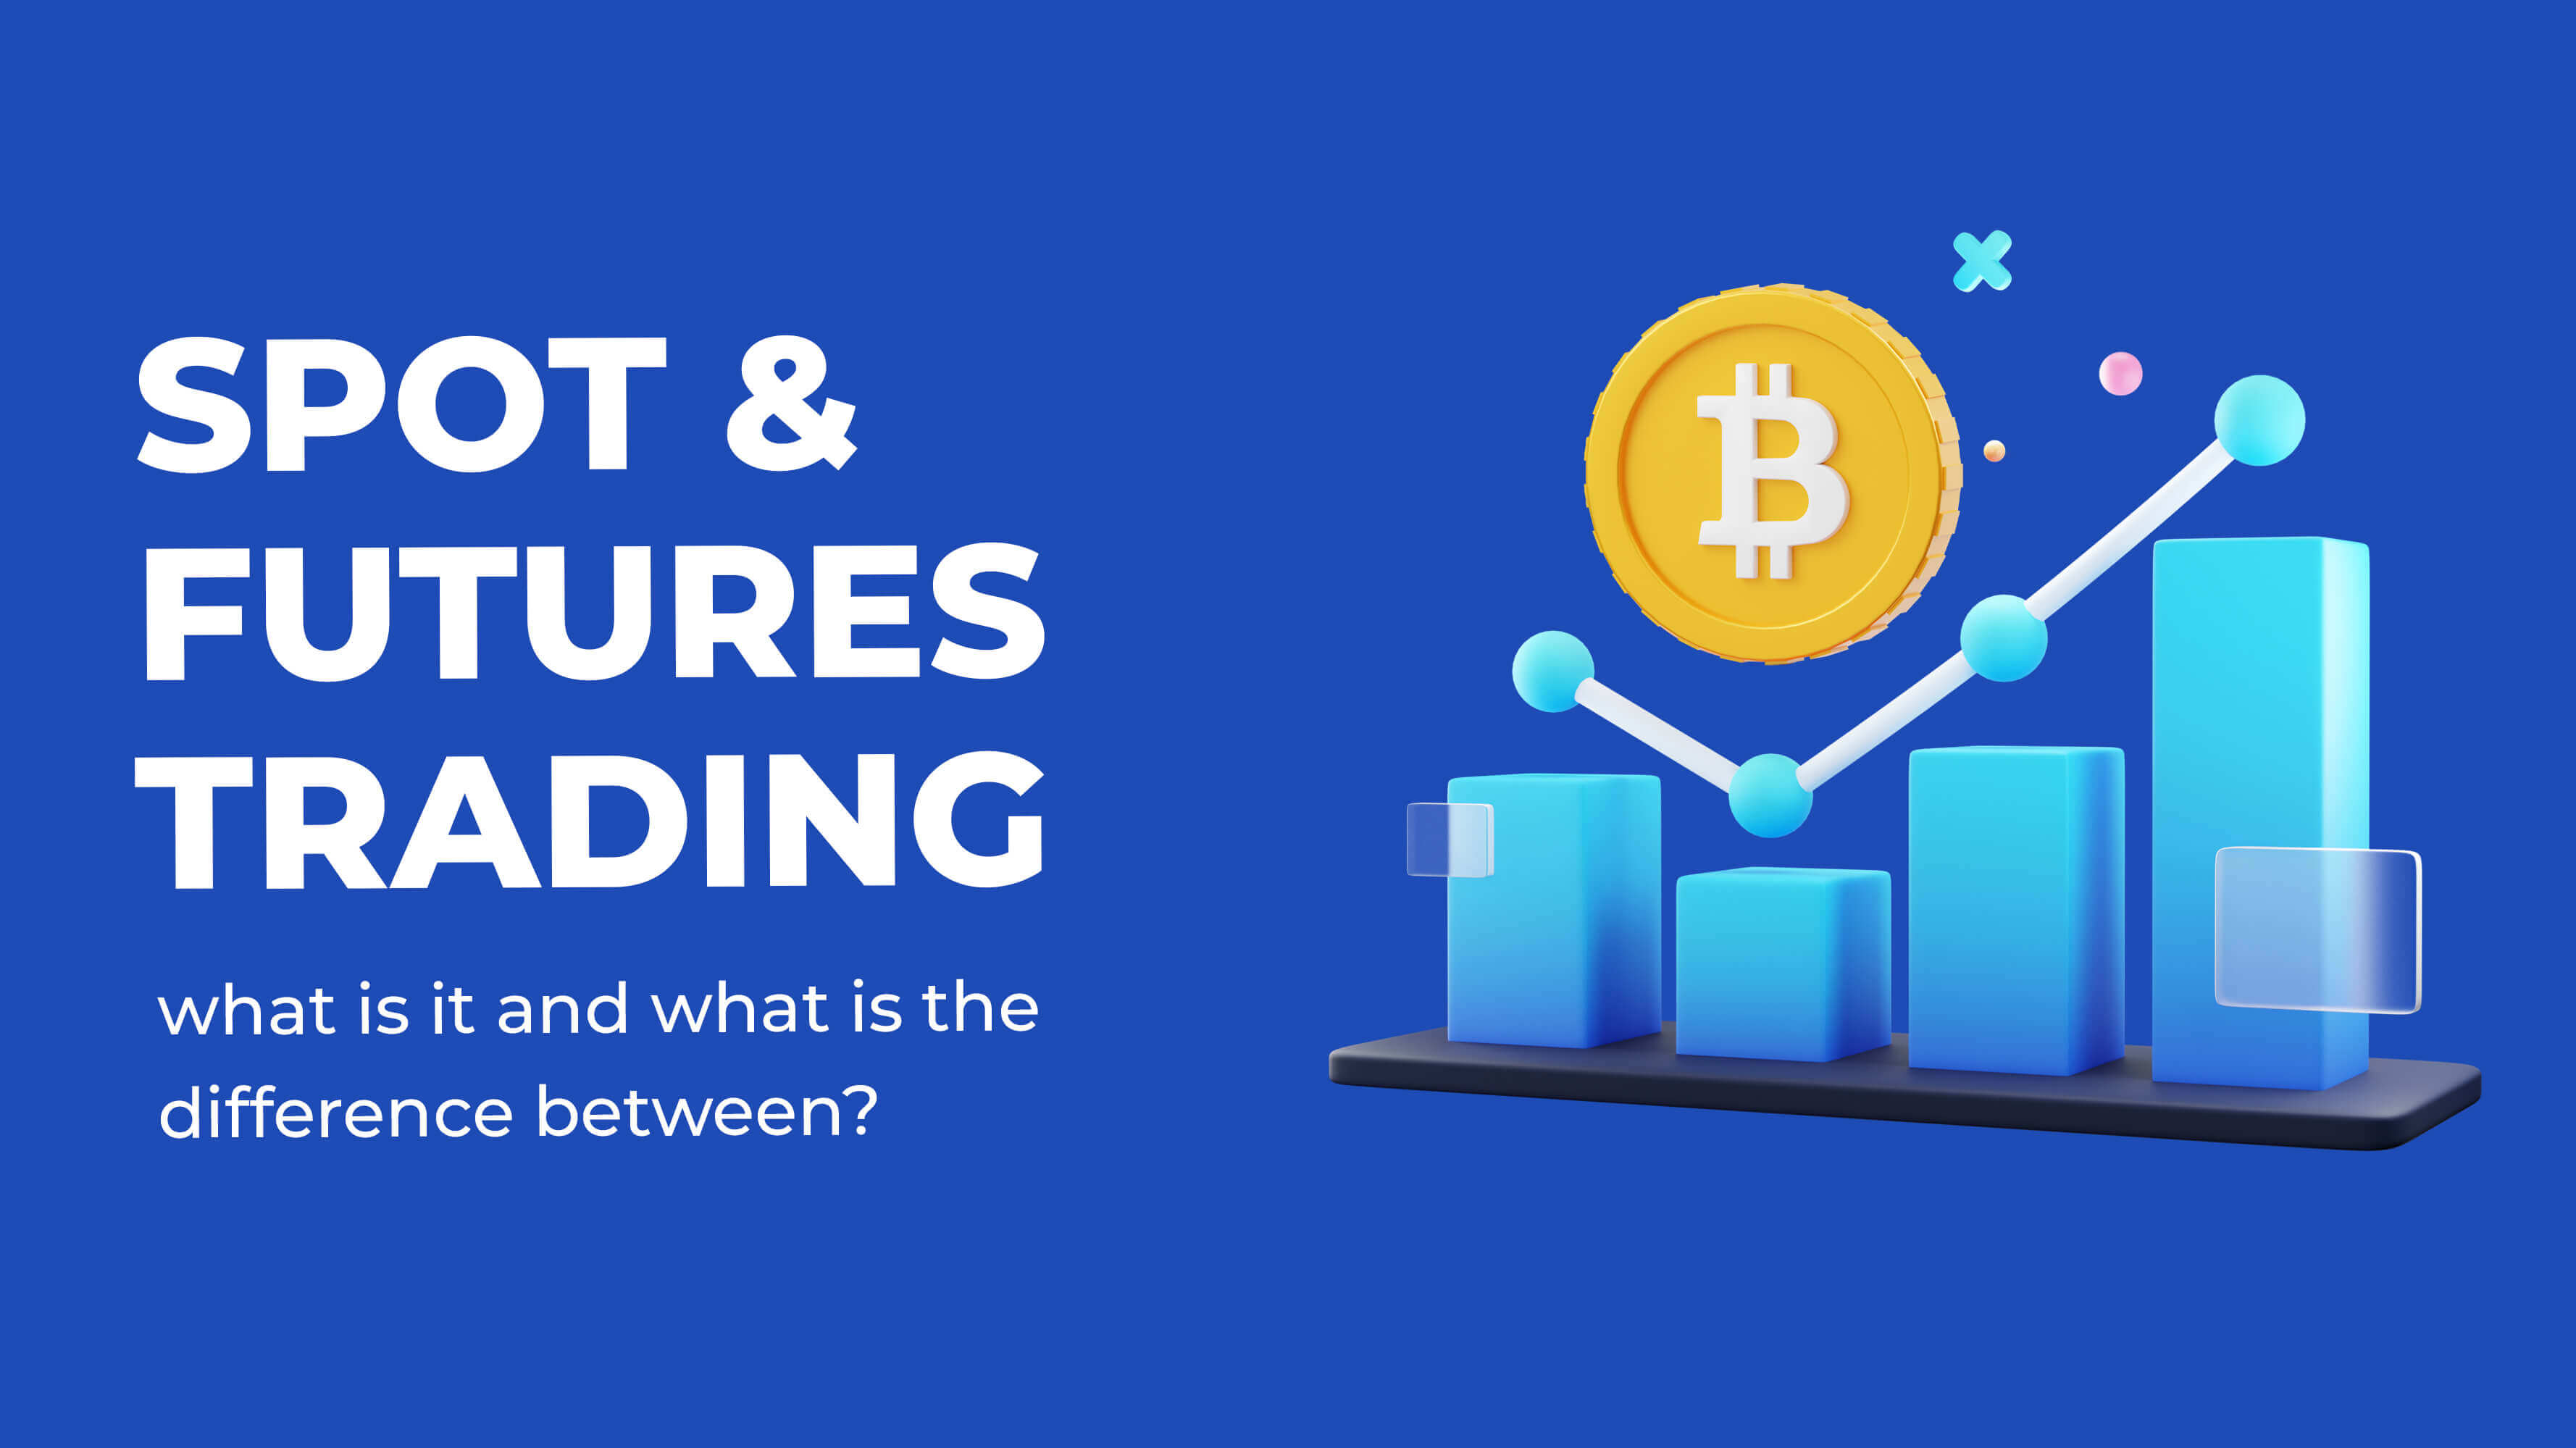 Spot vs Futures trading, what is the difference between them?